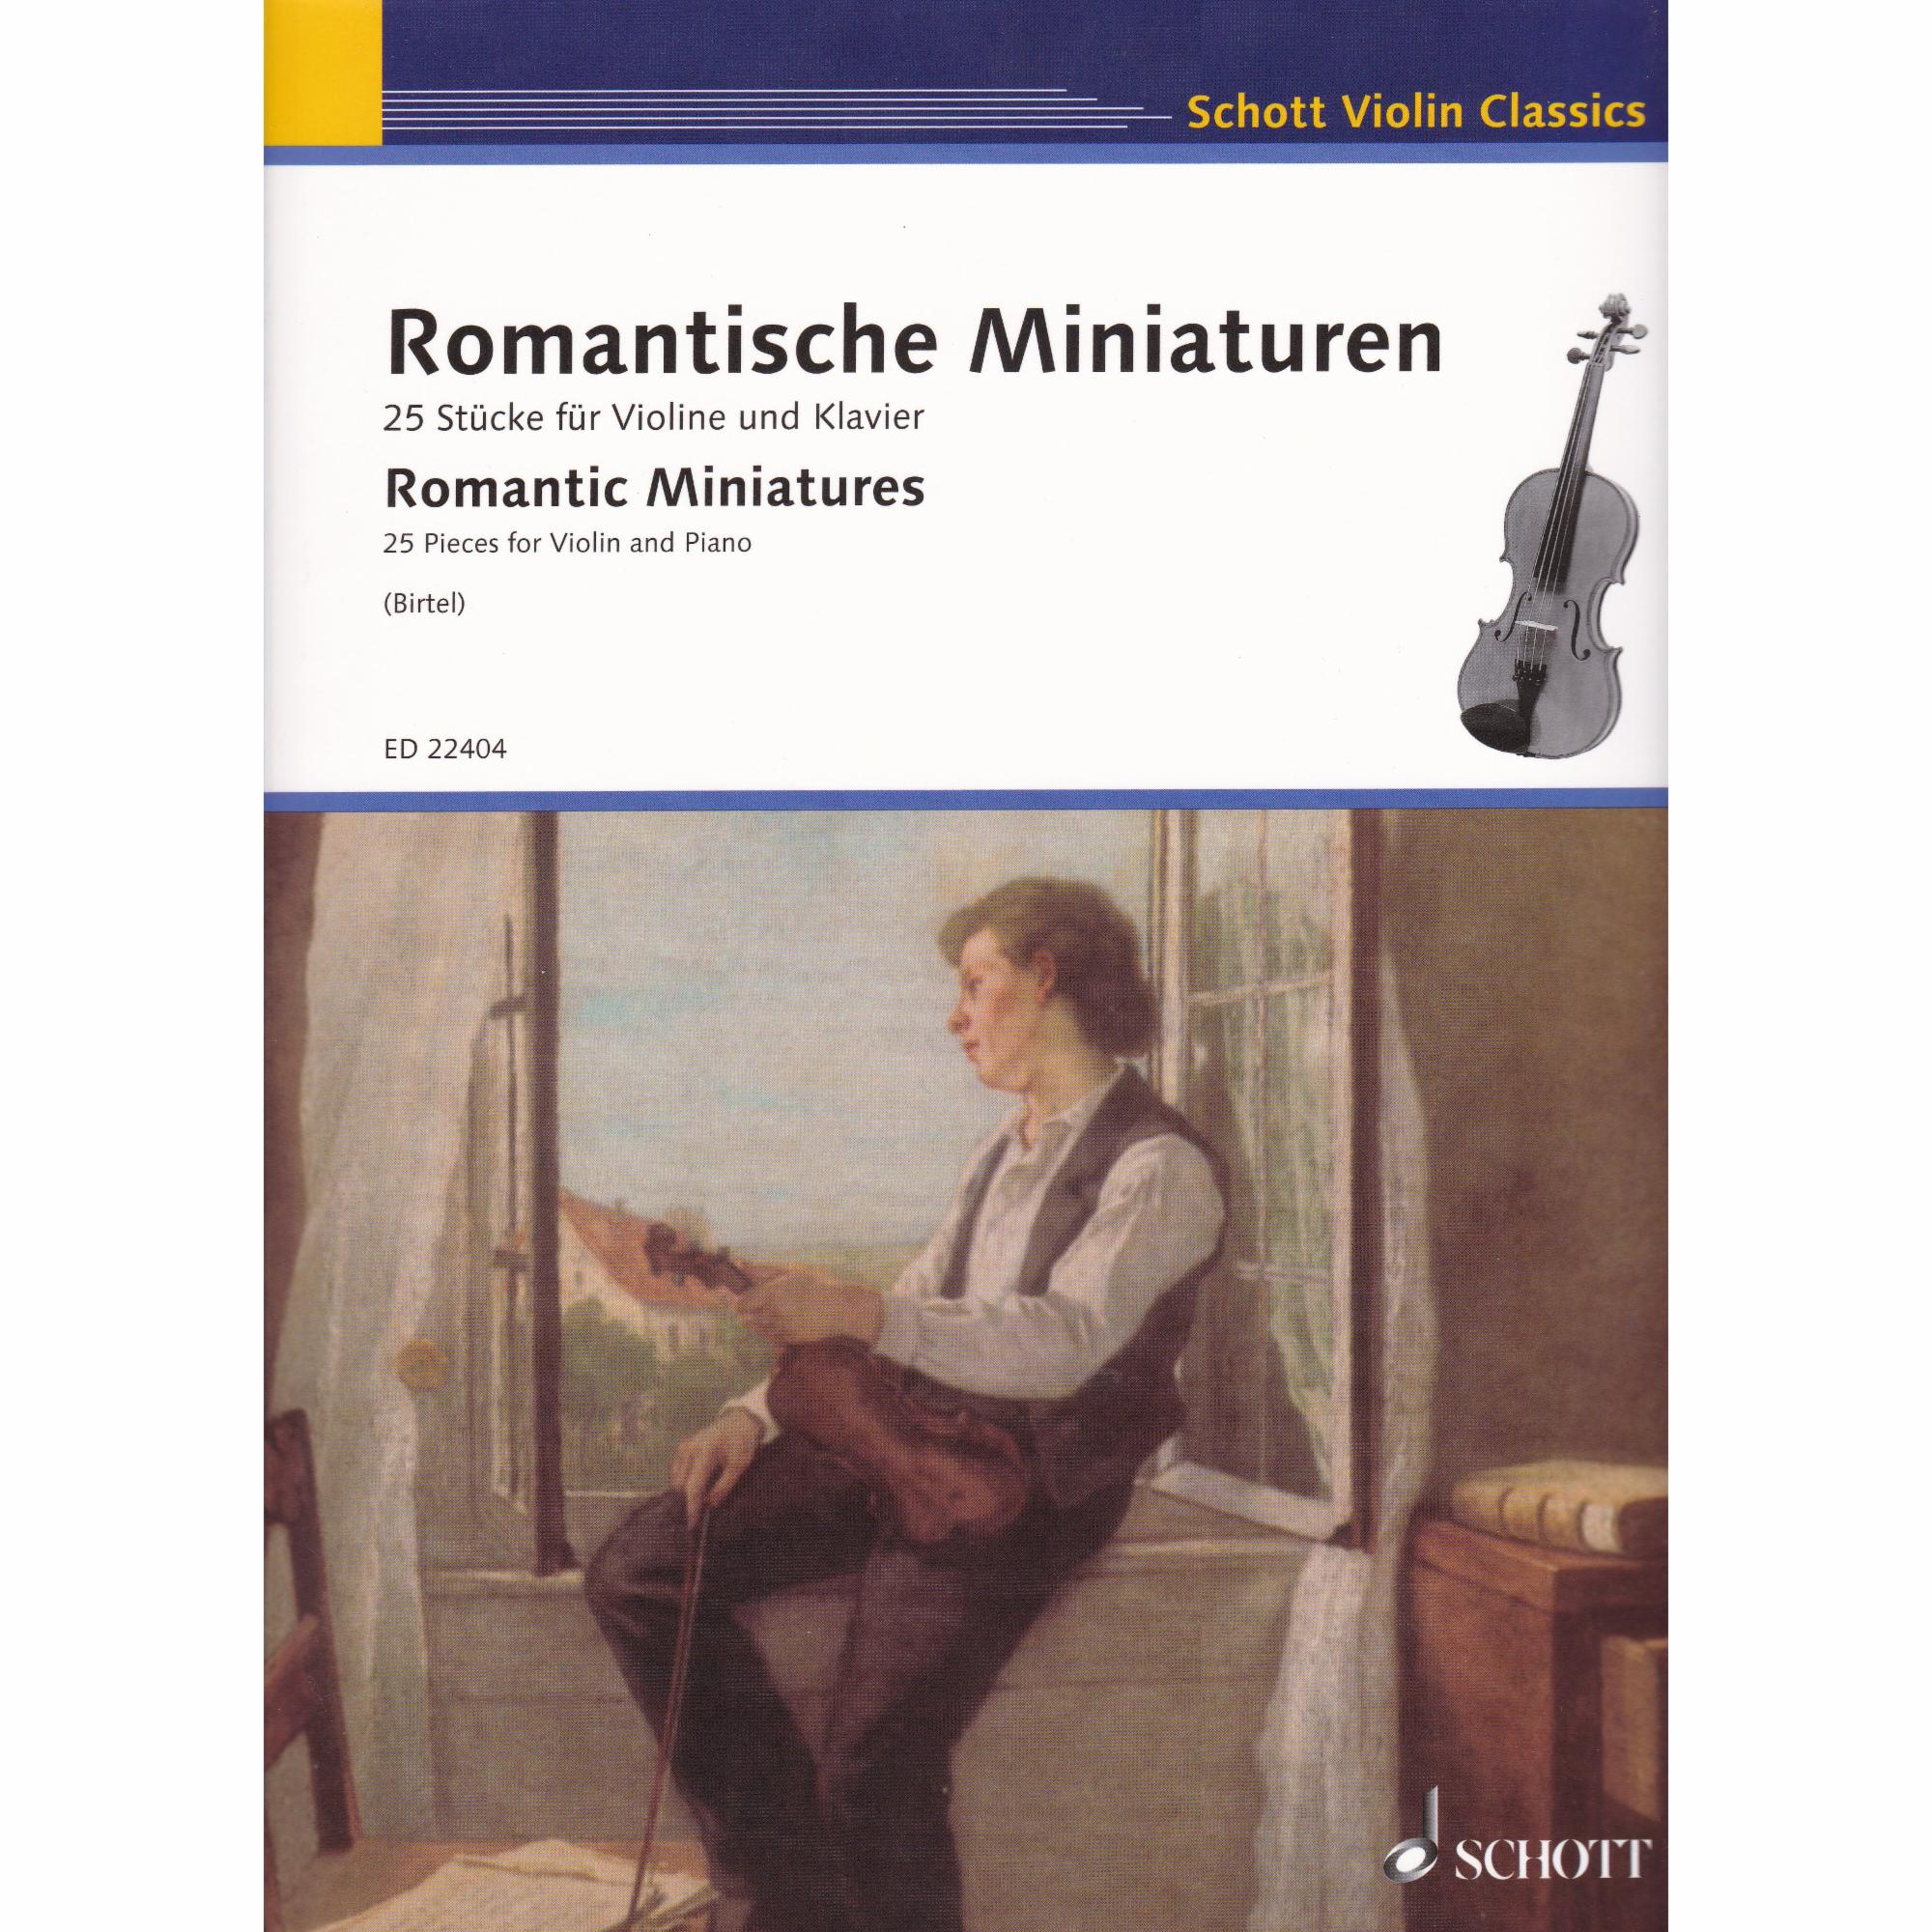 Romantic Miniatures for Violin and Piano